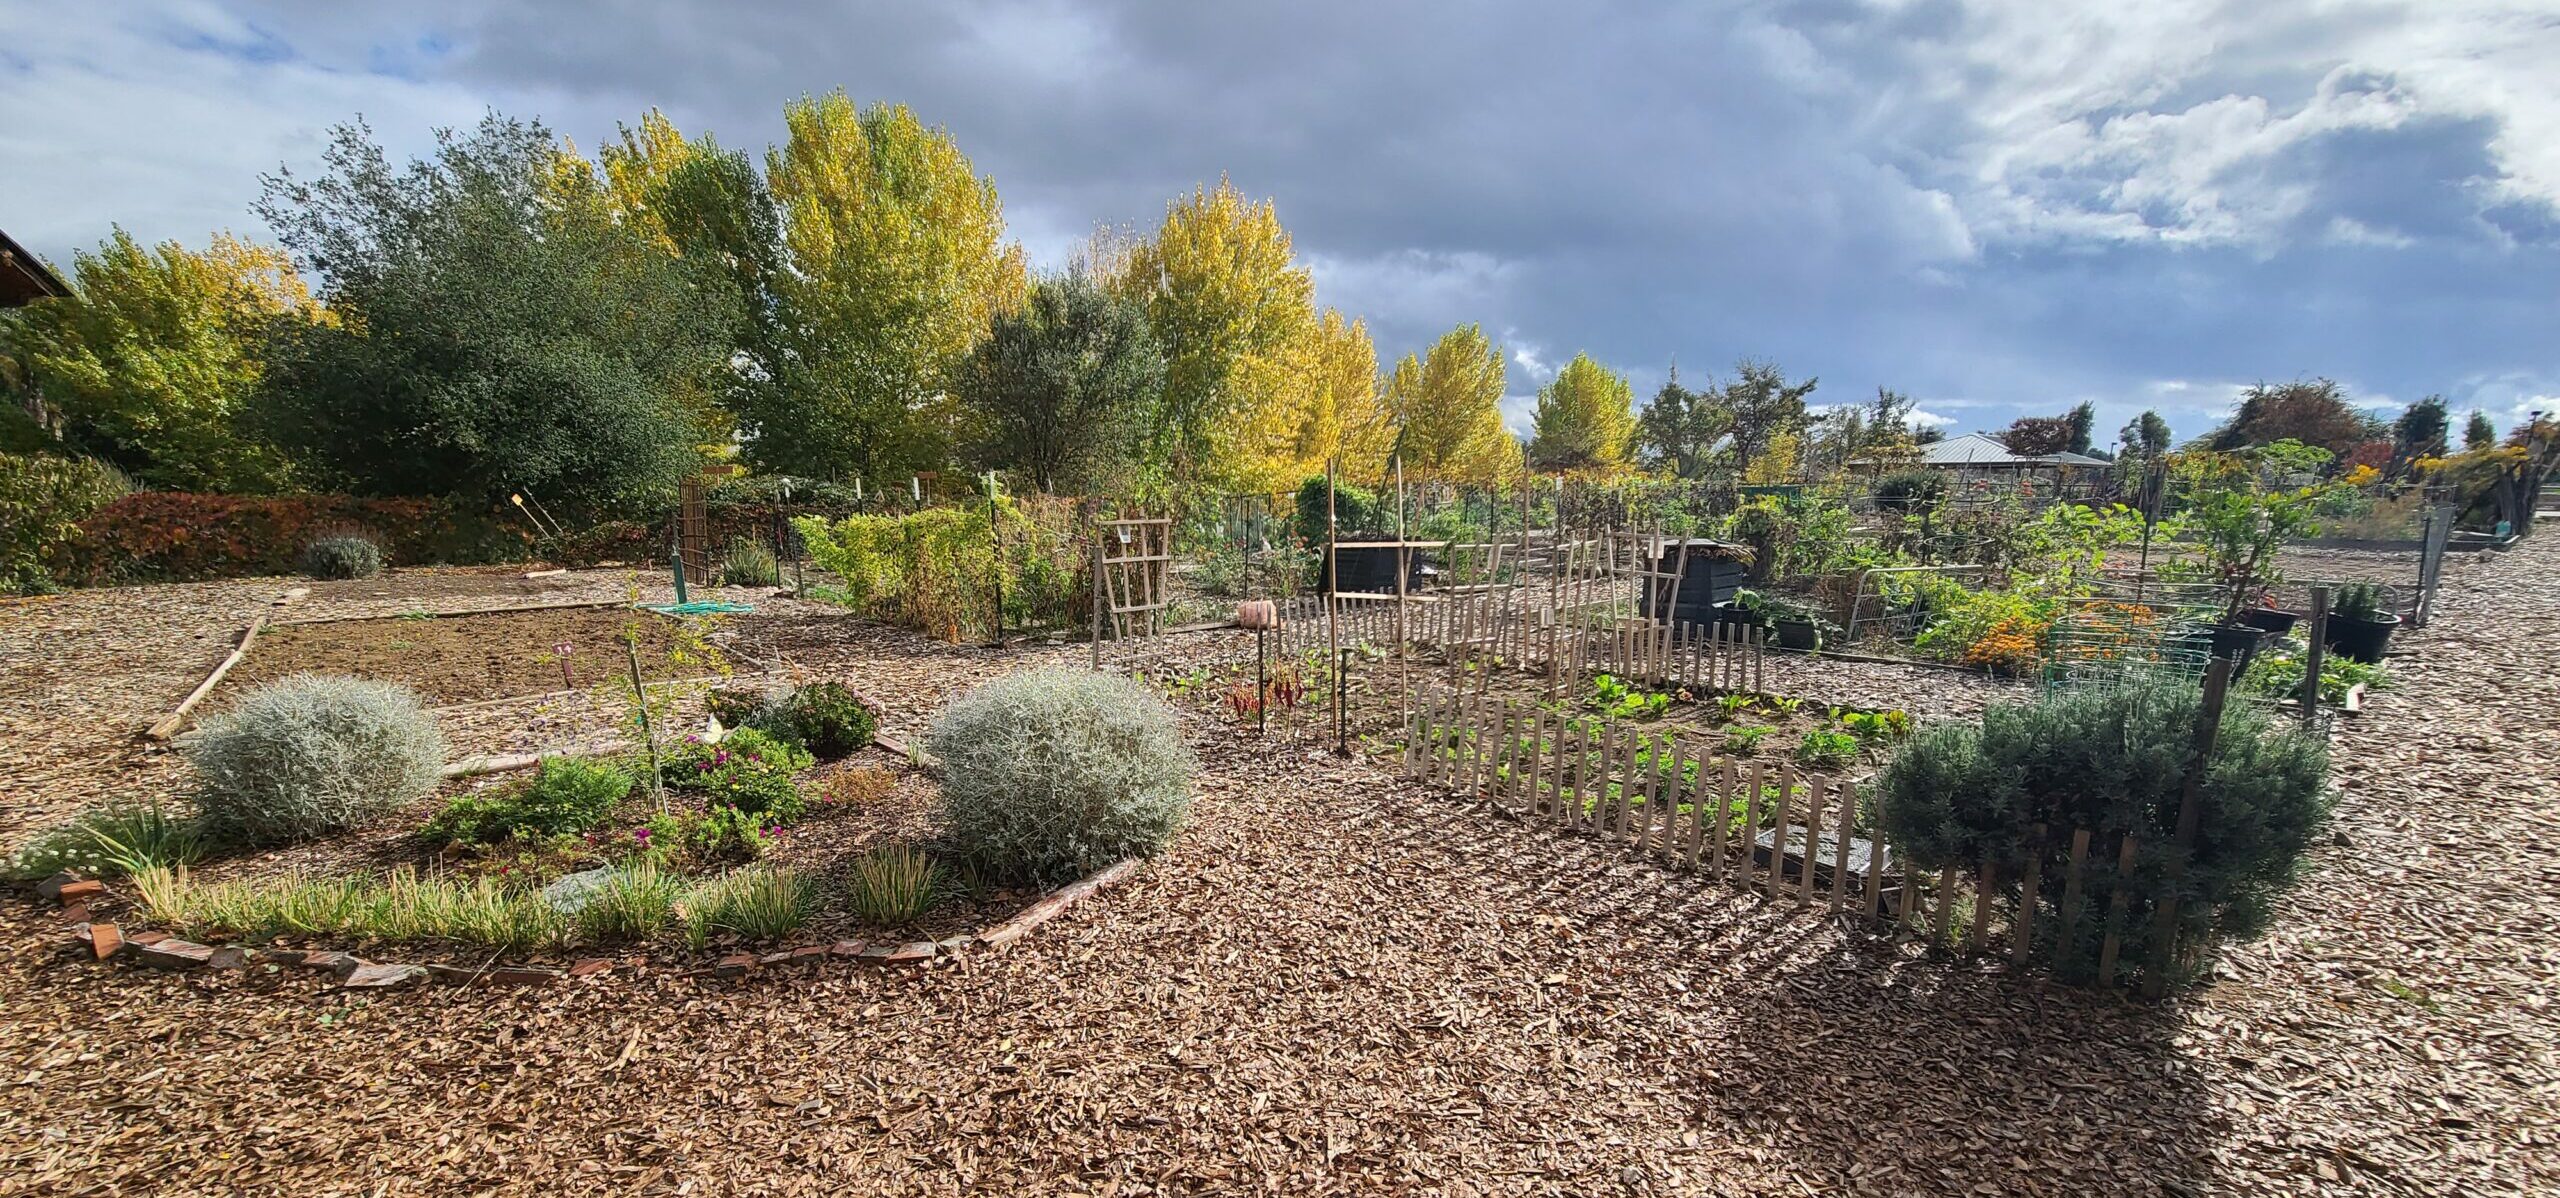 A community garden with beds and bark on a cloudy day.